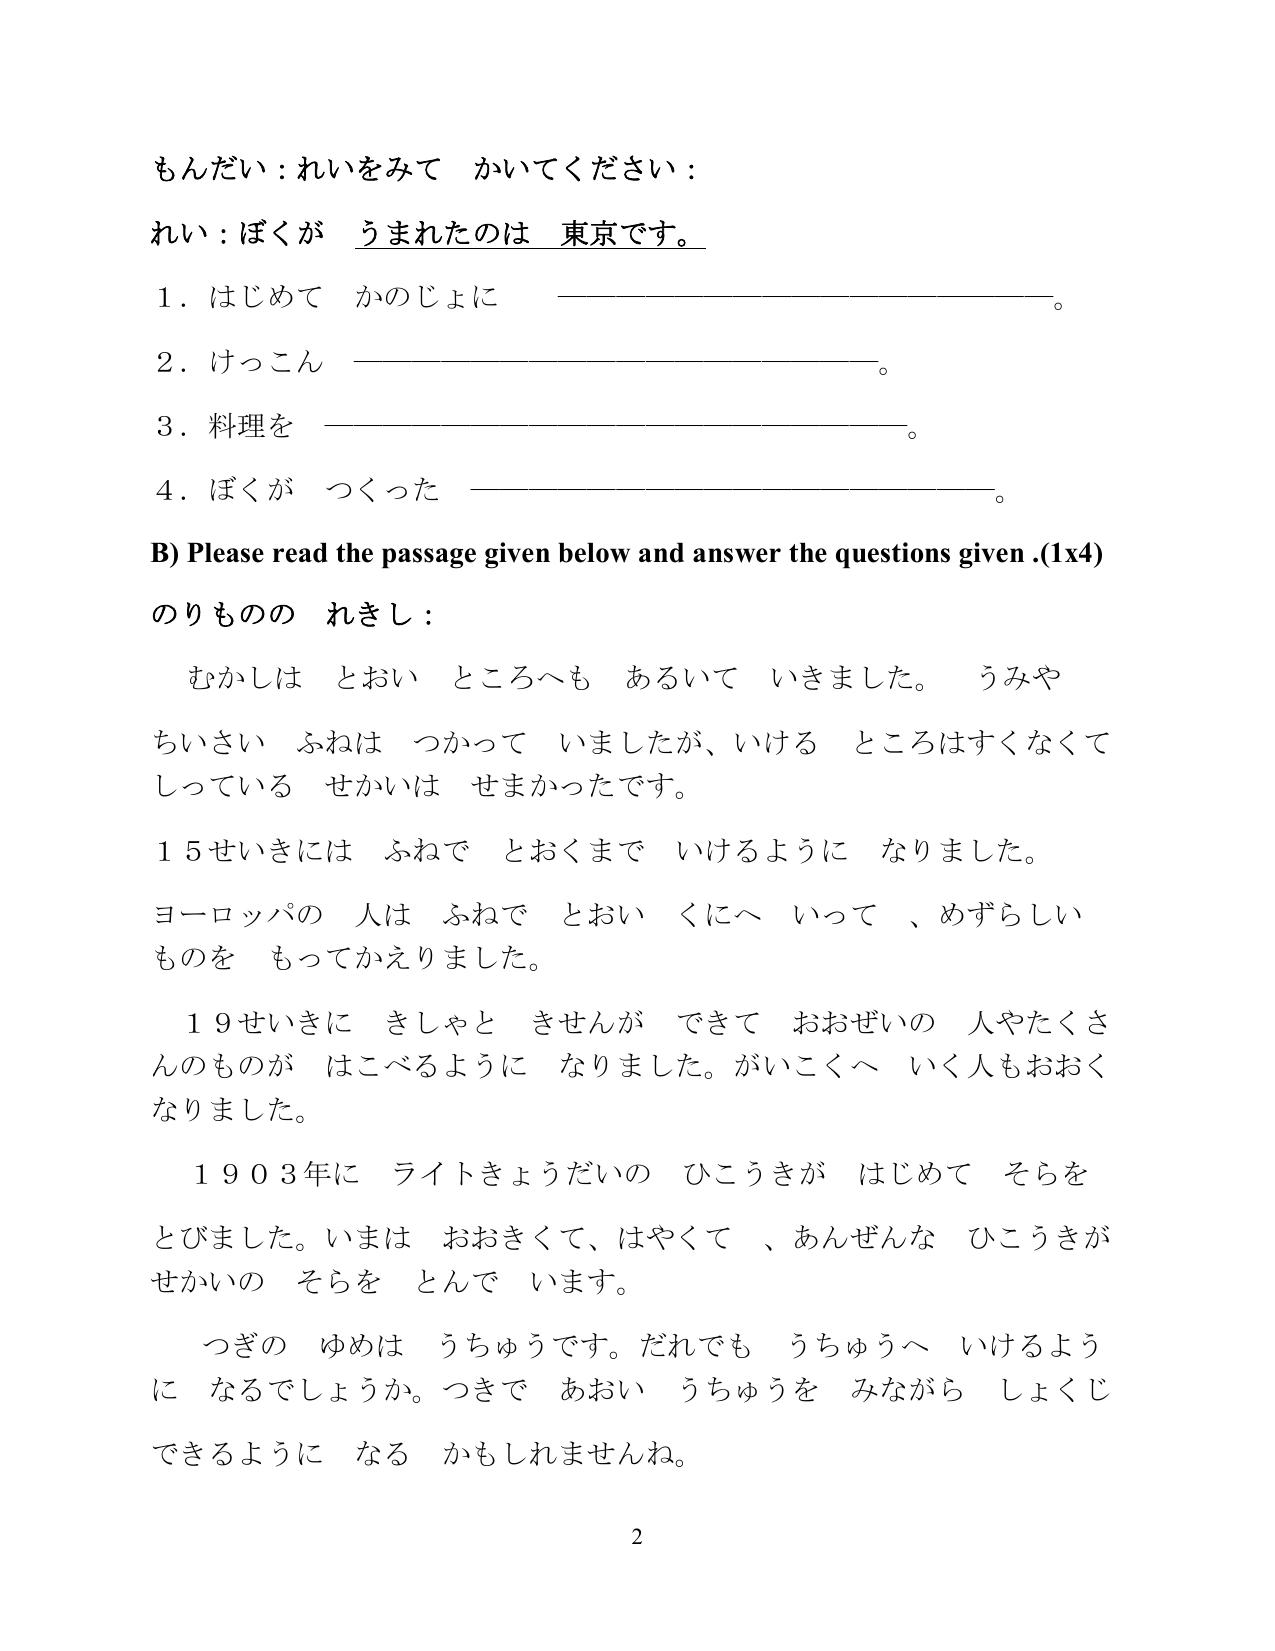 CBSE Class 12 Japanese -Sample Paper 2019-20 - Page 2